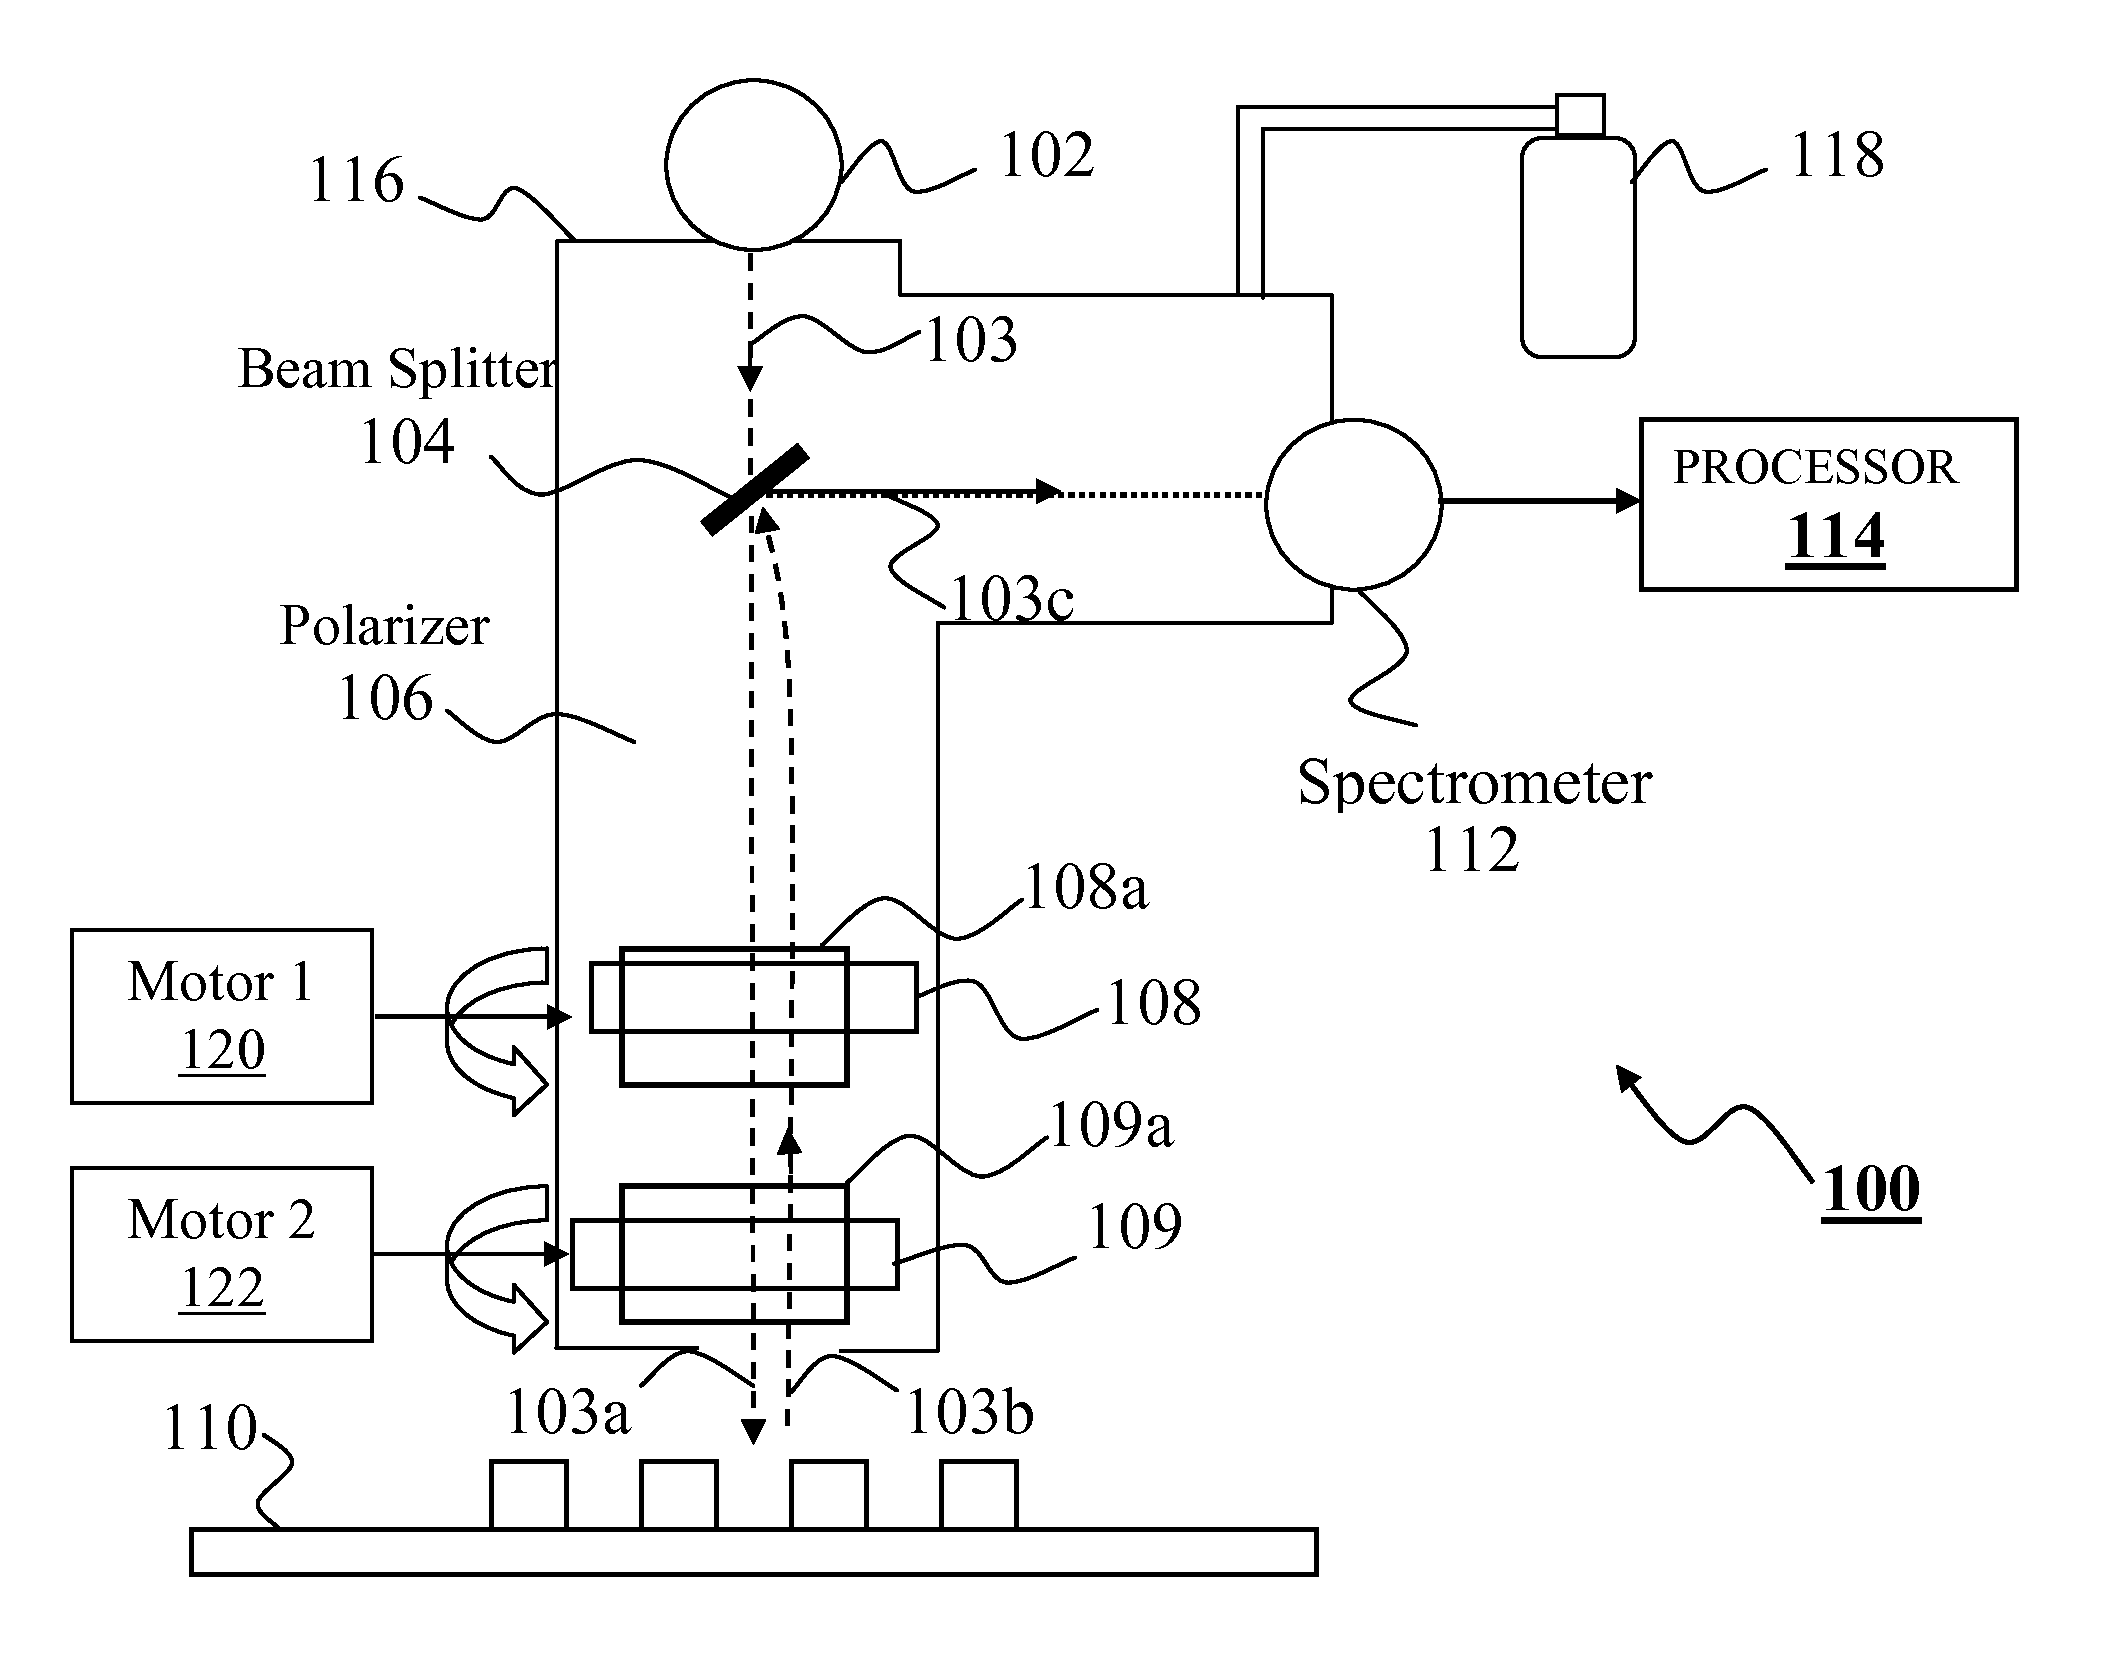 Normal incidence ellipsometer with complementary waveplate rotating compensators